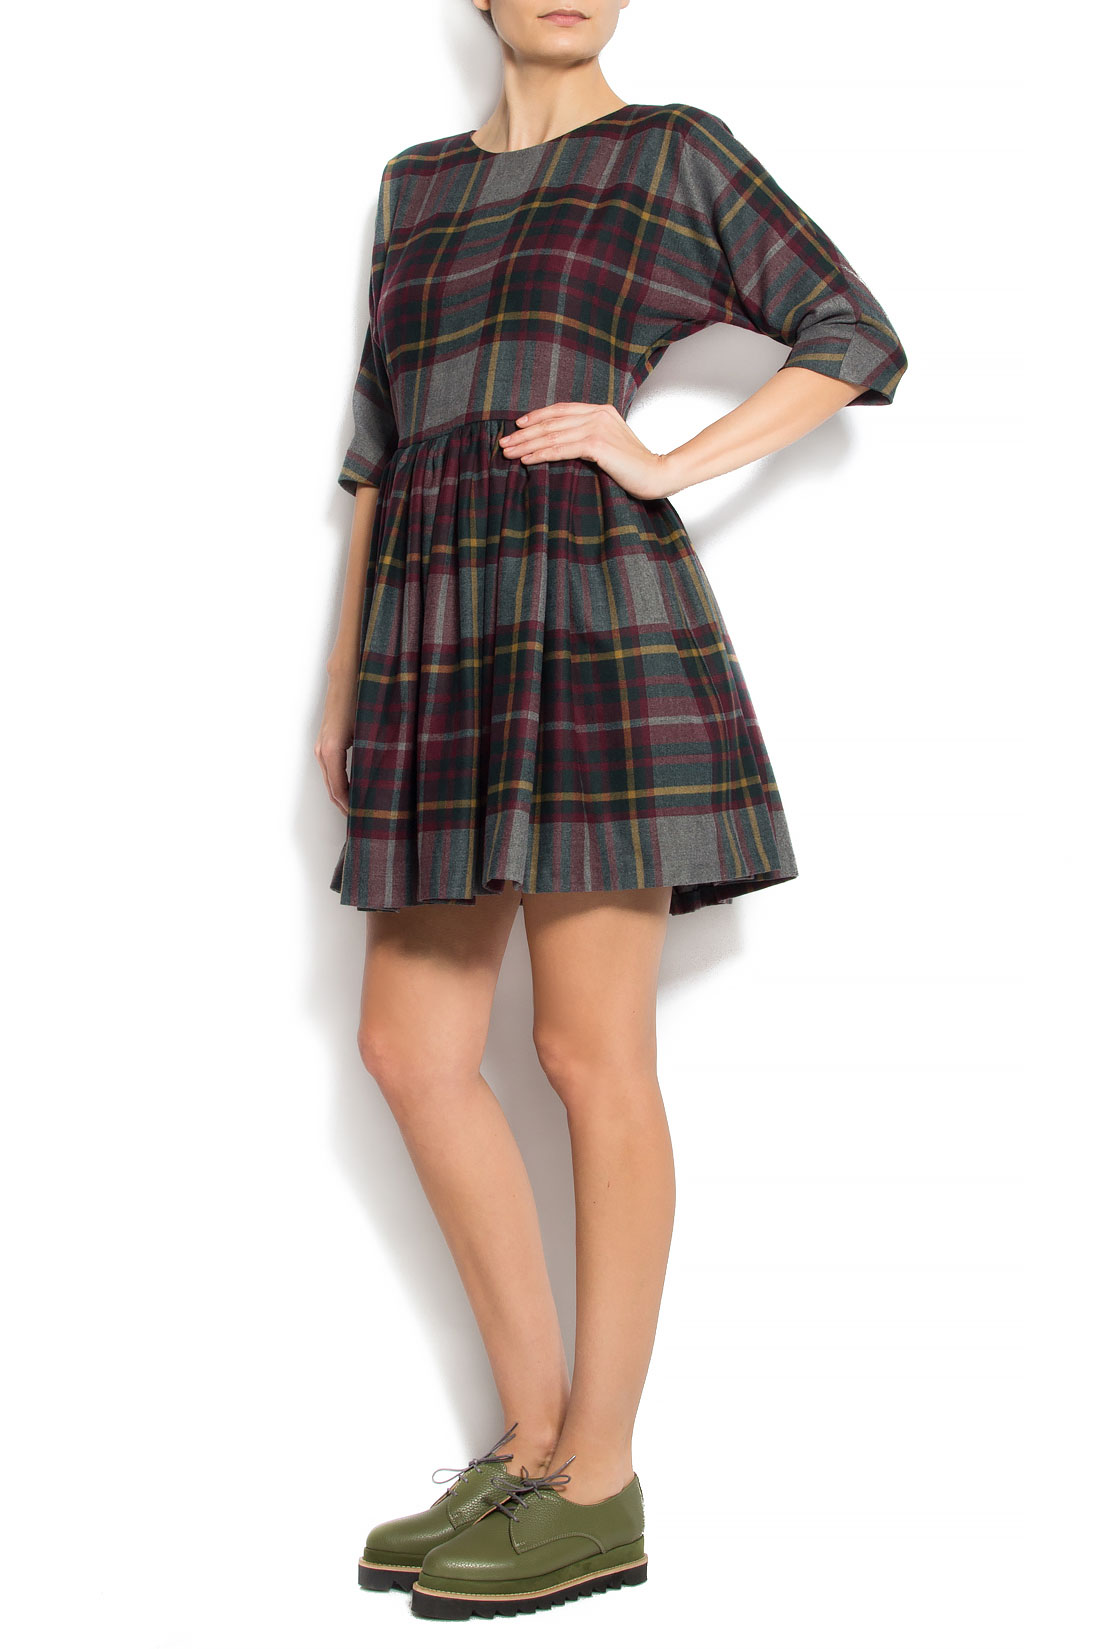 Checked wool mini dress Claudia Castrase image 1